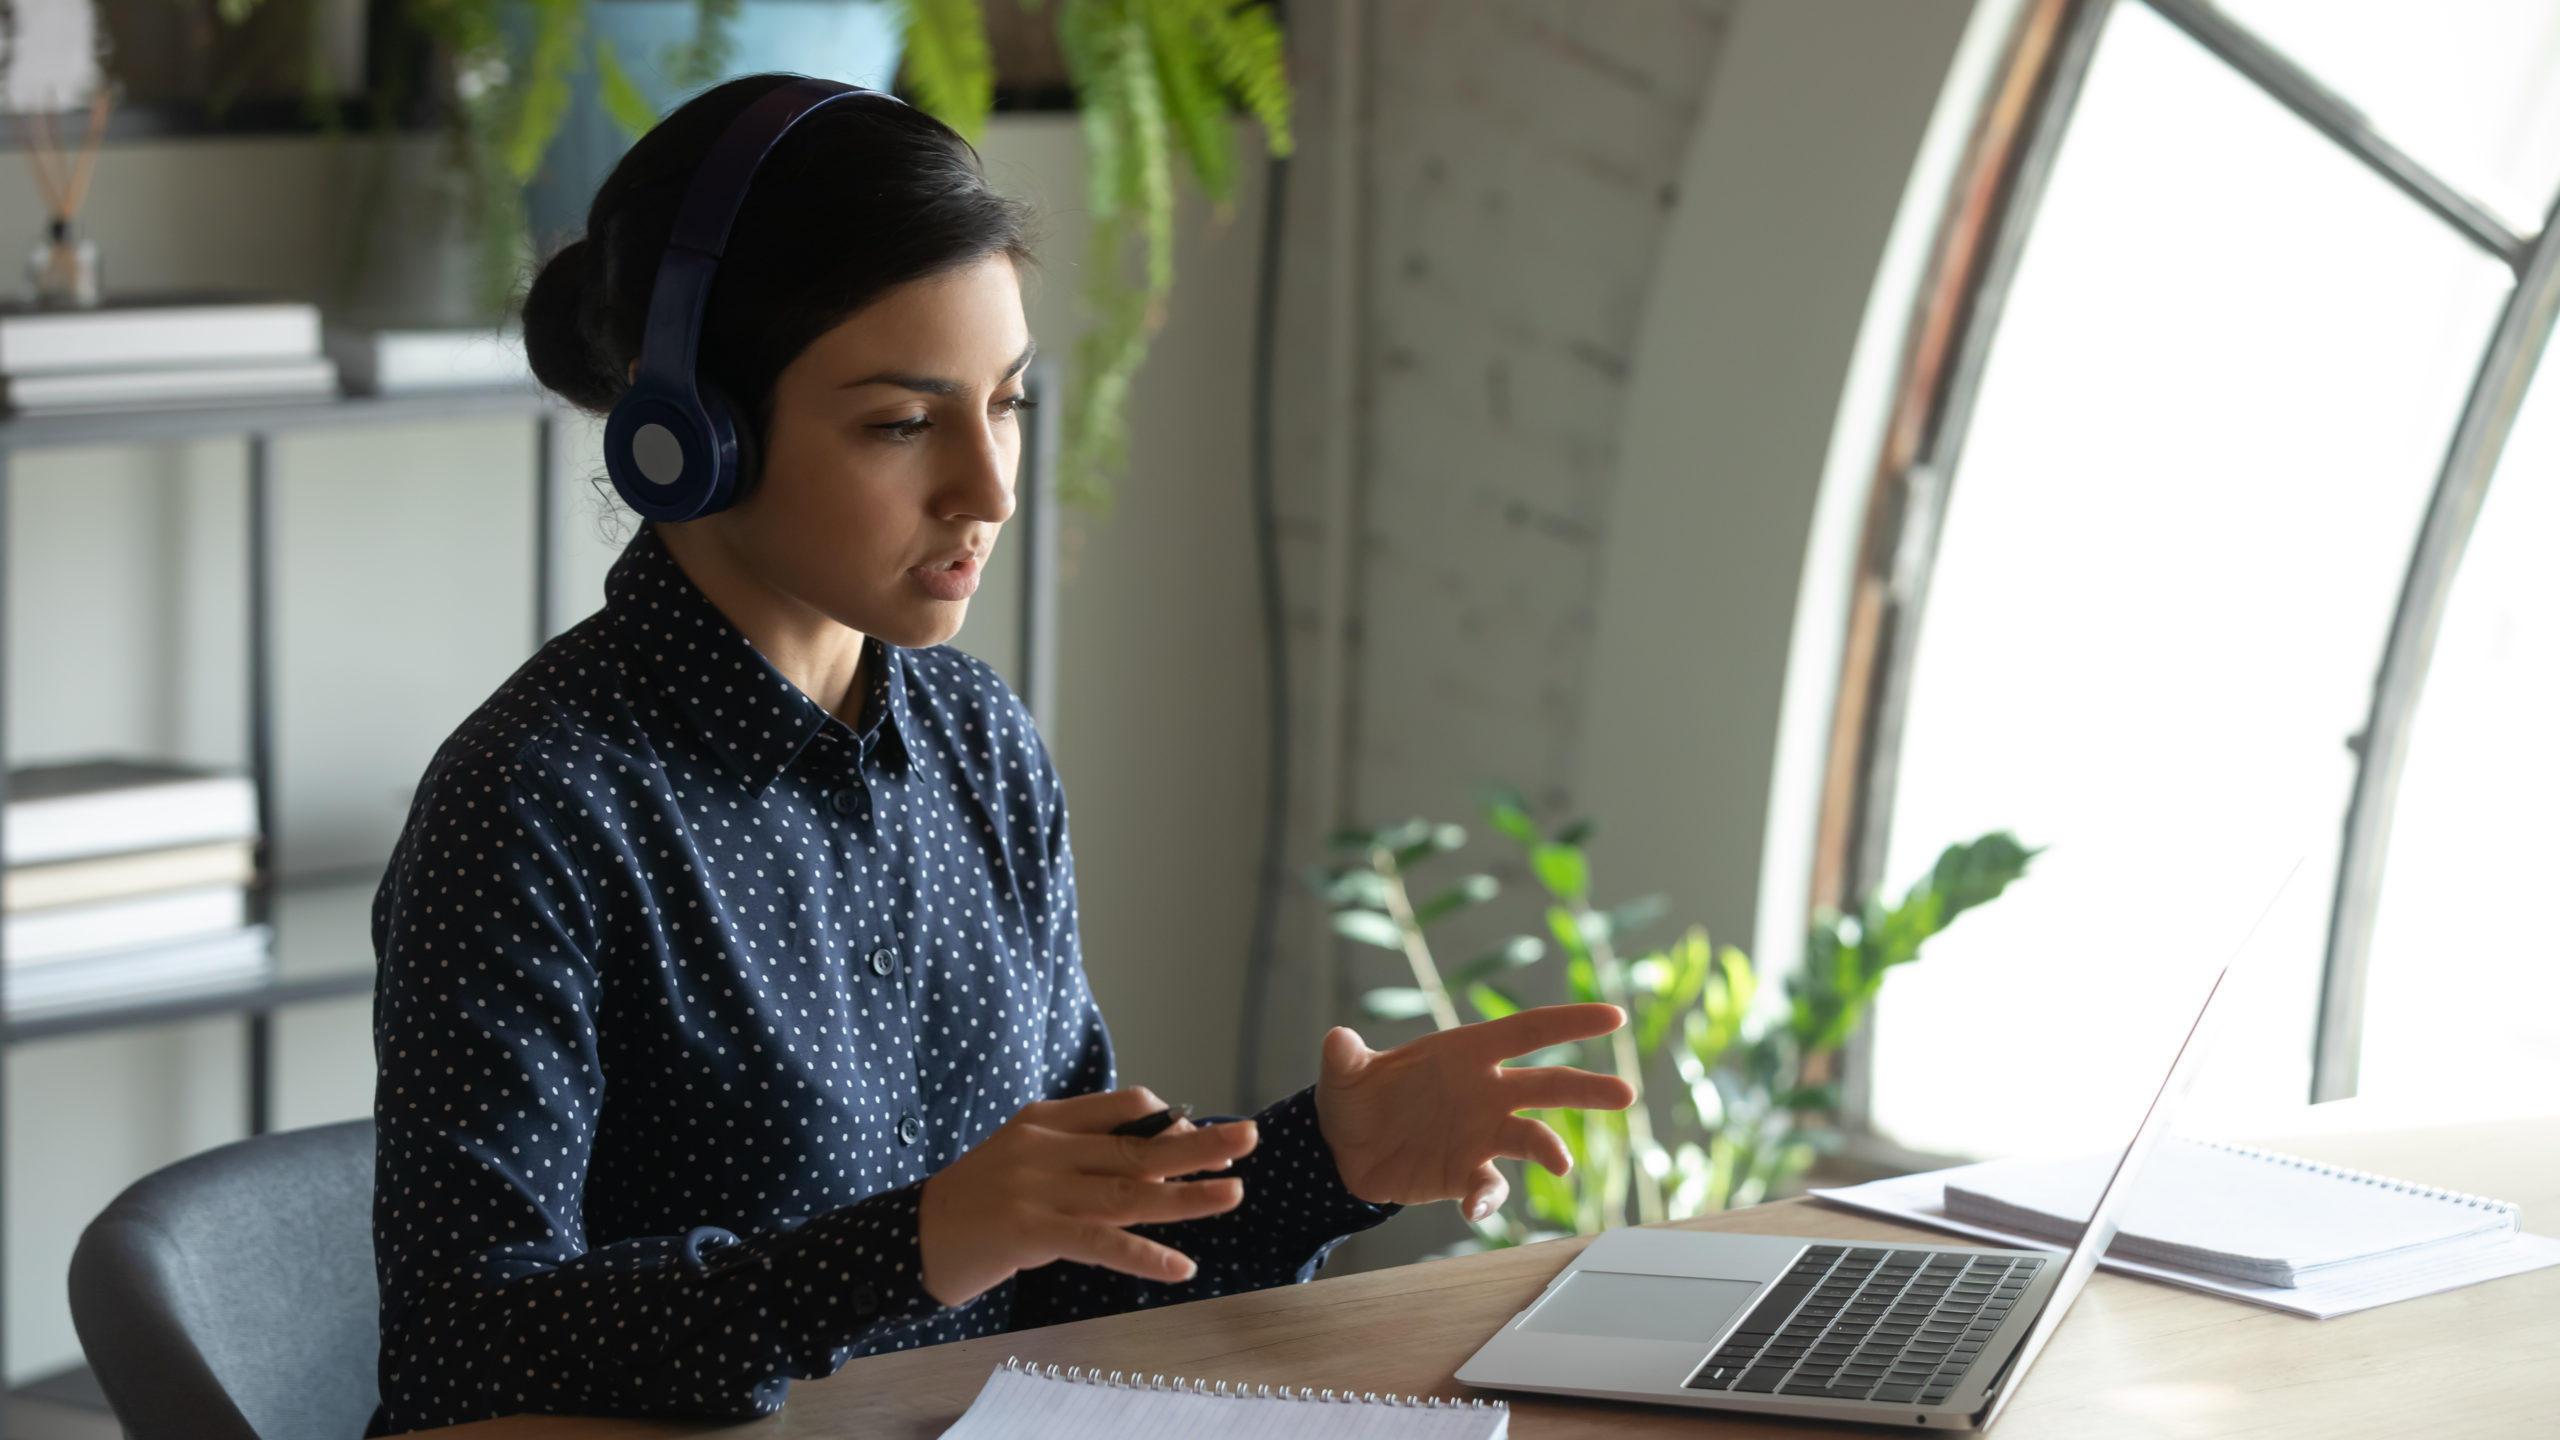 A young multiracial woman wearing a video conference headset and speaking on a conference call